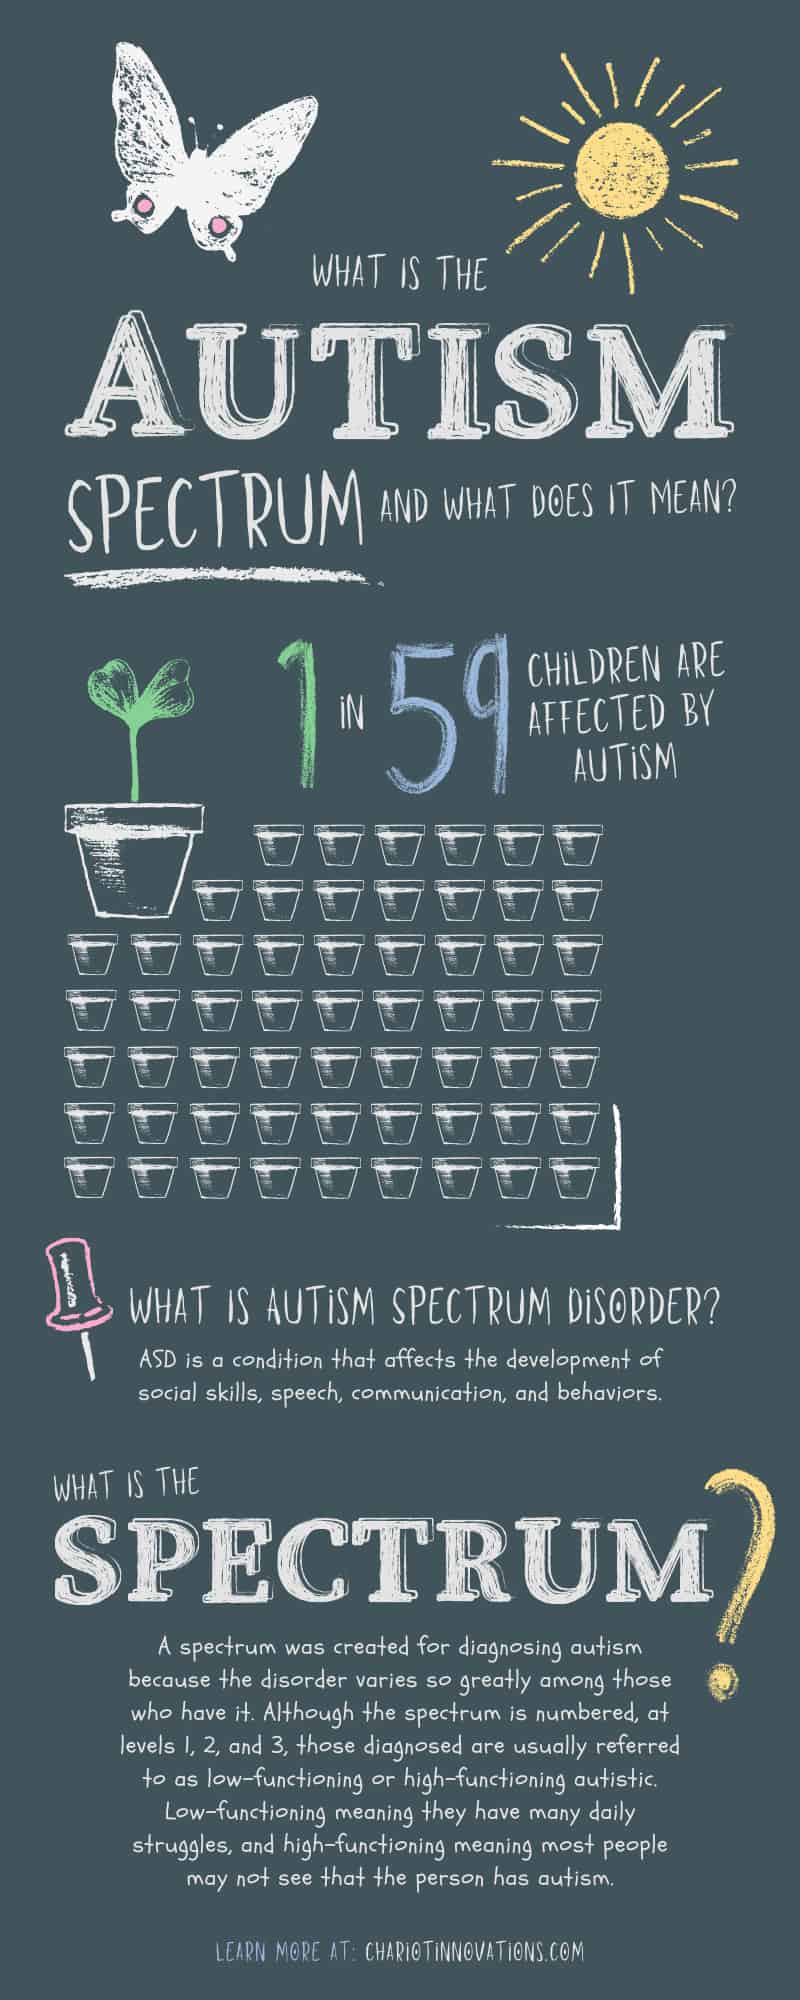 What Is the Autism Spectrum and What Does It Mean?
